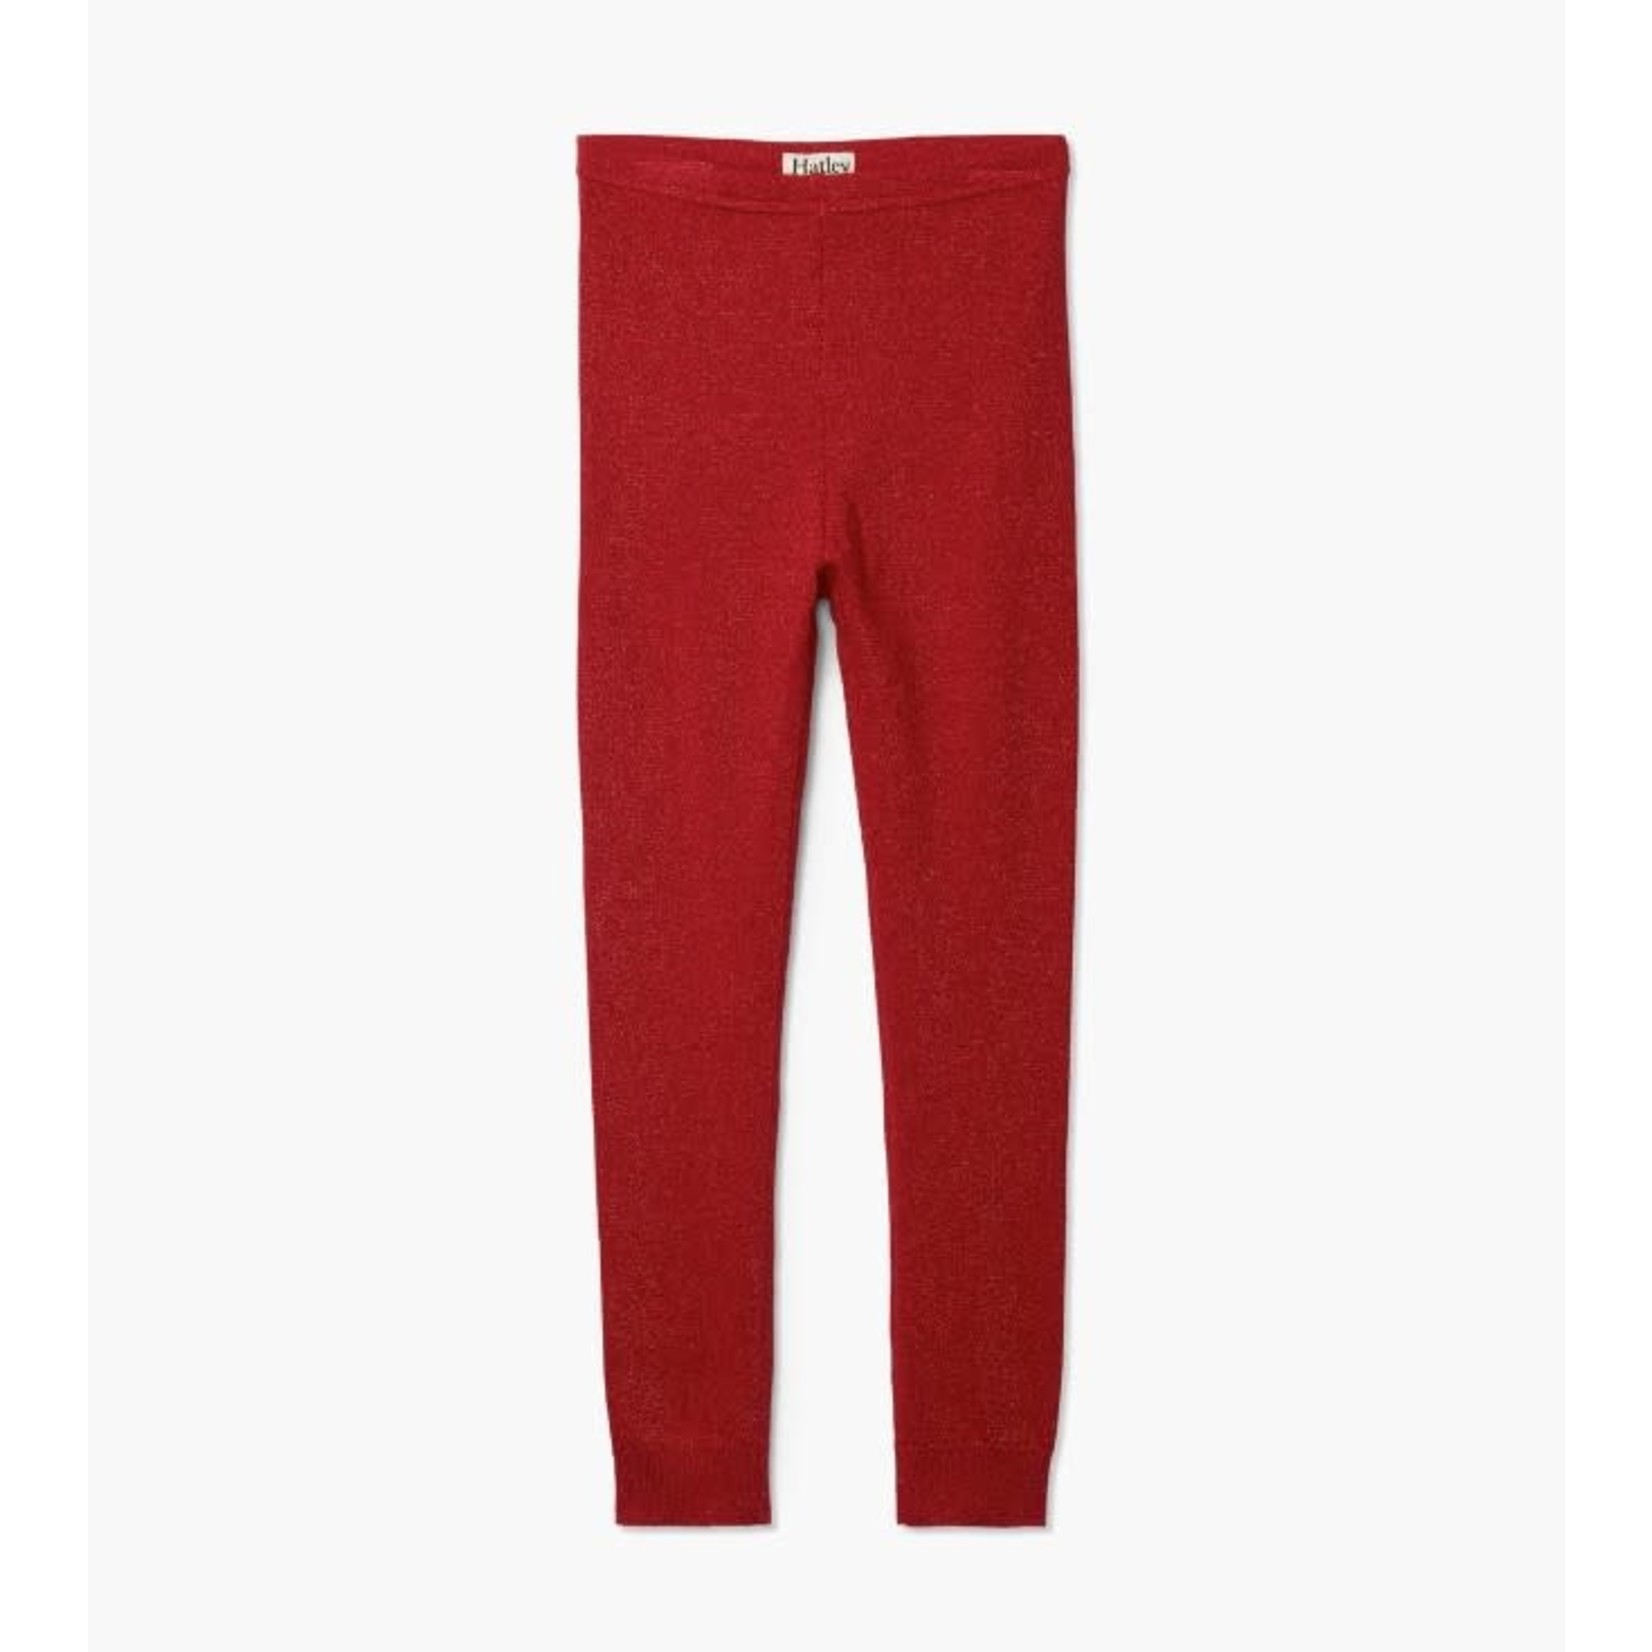 Hatley HATLEY - Red shimmer cable knit leggings